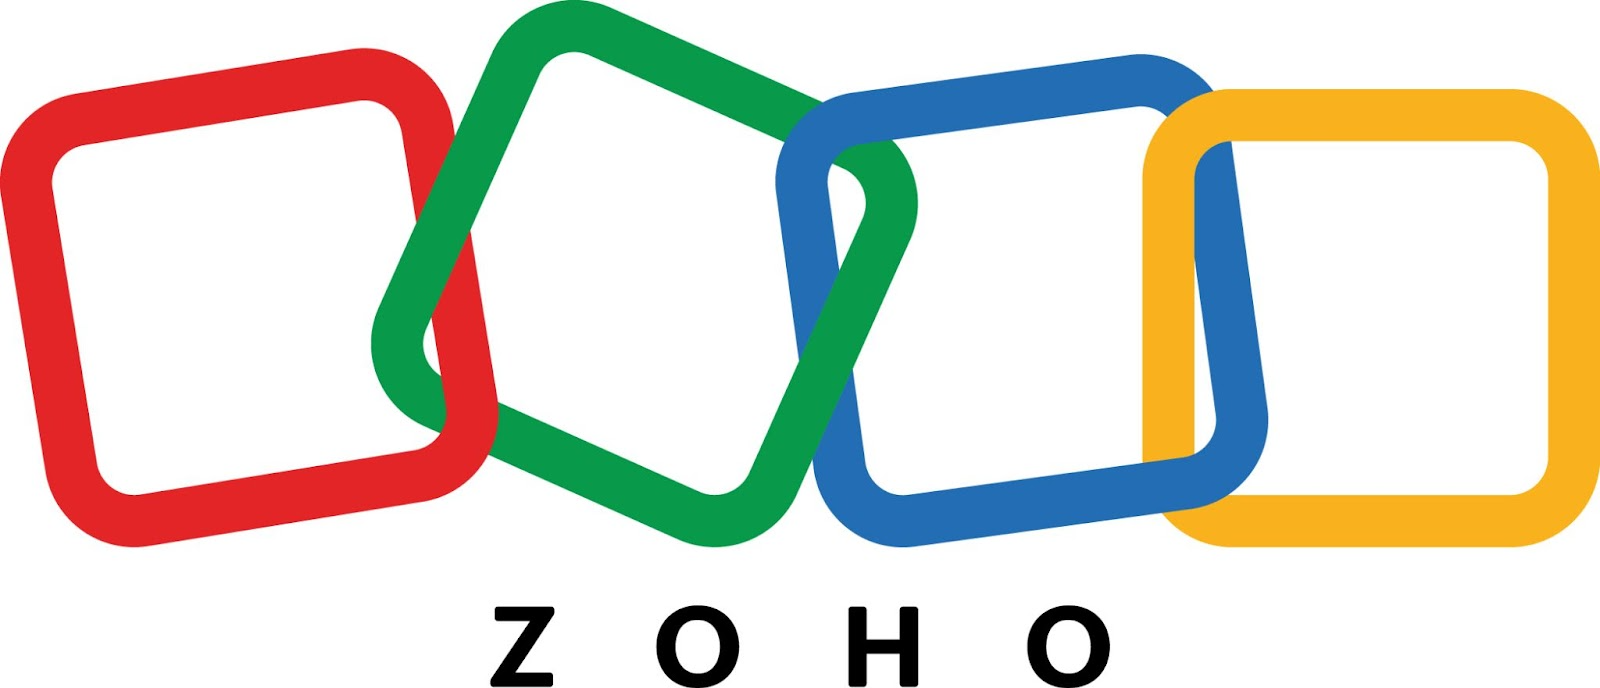 Zoho Launches Privacy-Centred Web Browser, Ulaa, To Provide A Surveillance-Free Browsing Experience